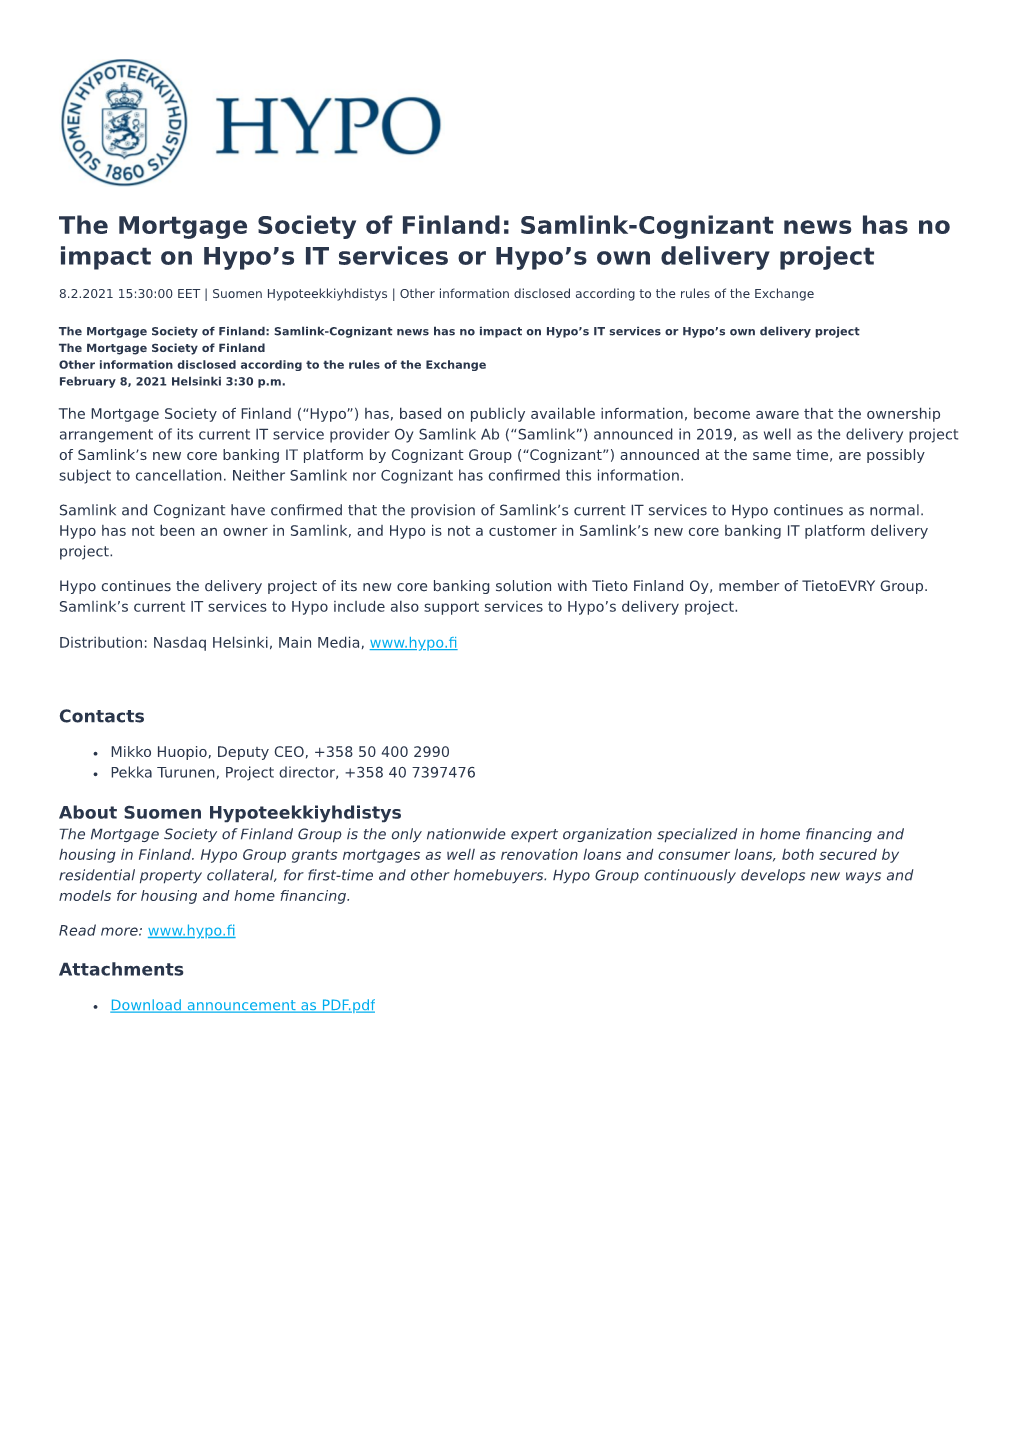 The Mortgage Society of Finland: Samlink-Cognizant News Has No Impact on Hypo’S IT Services Or Hypo’S Own Delivery Project